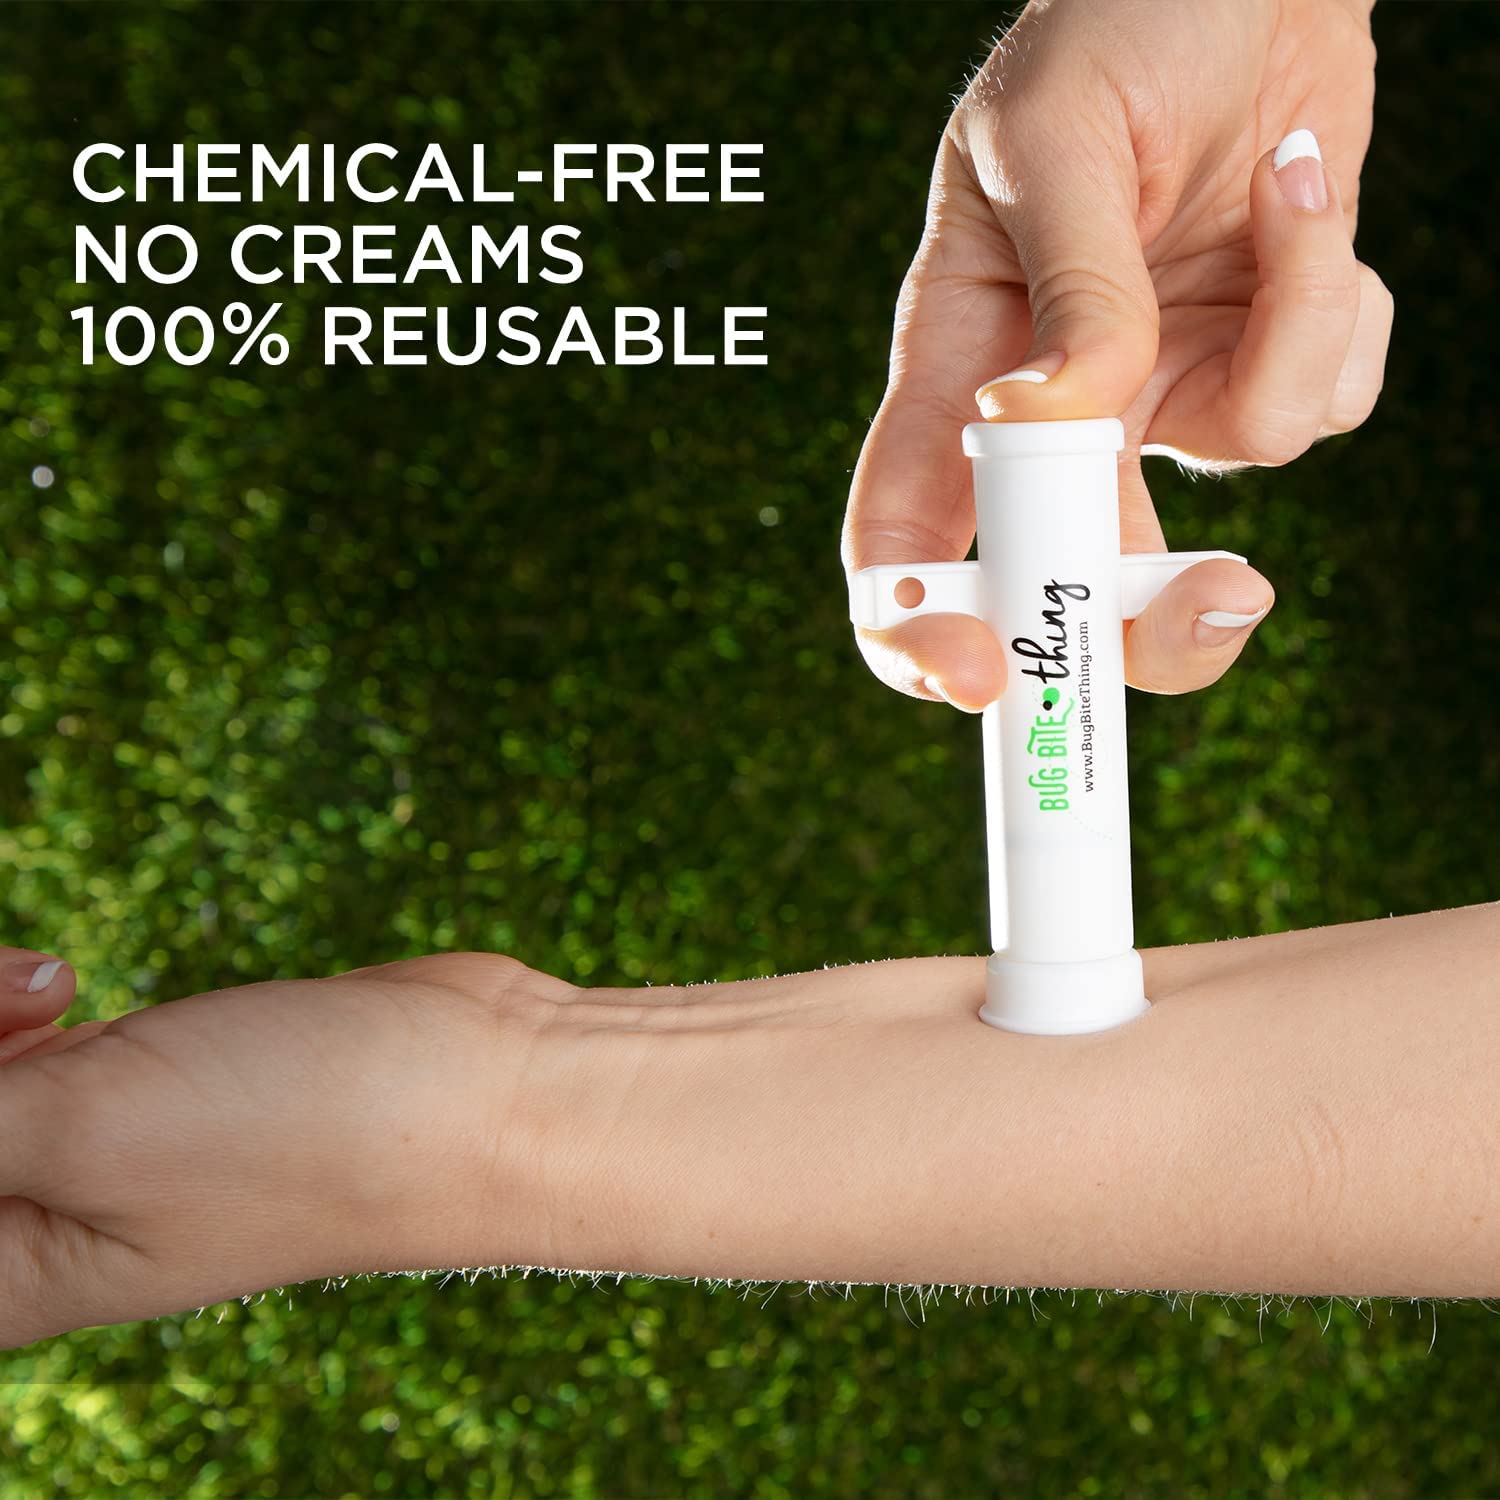 A pair of hands is using a suction device called, 'Bug Bite Thing.' The device is being pressed into the forearm. The text reads, 'Chemical-free no creams 100% reusable.'